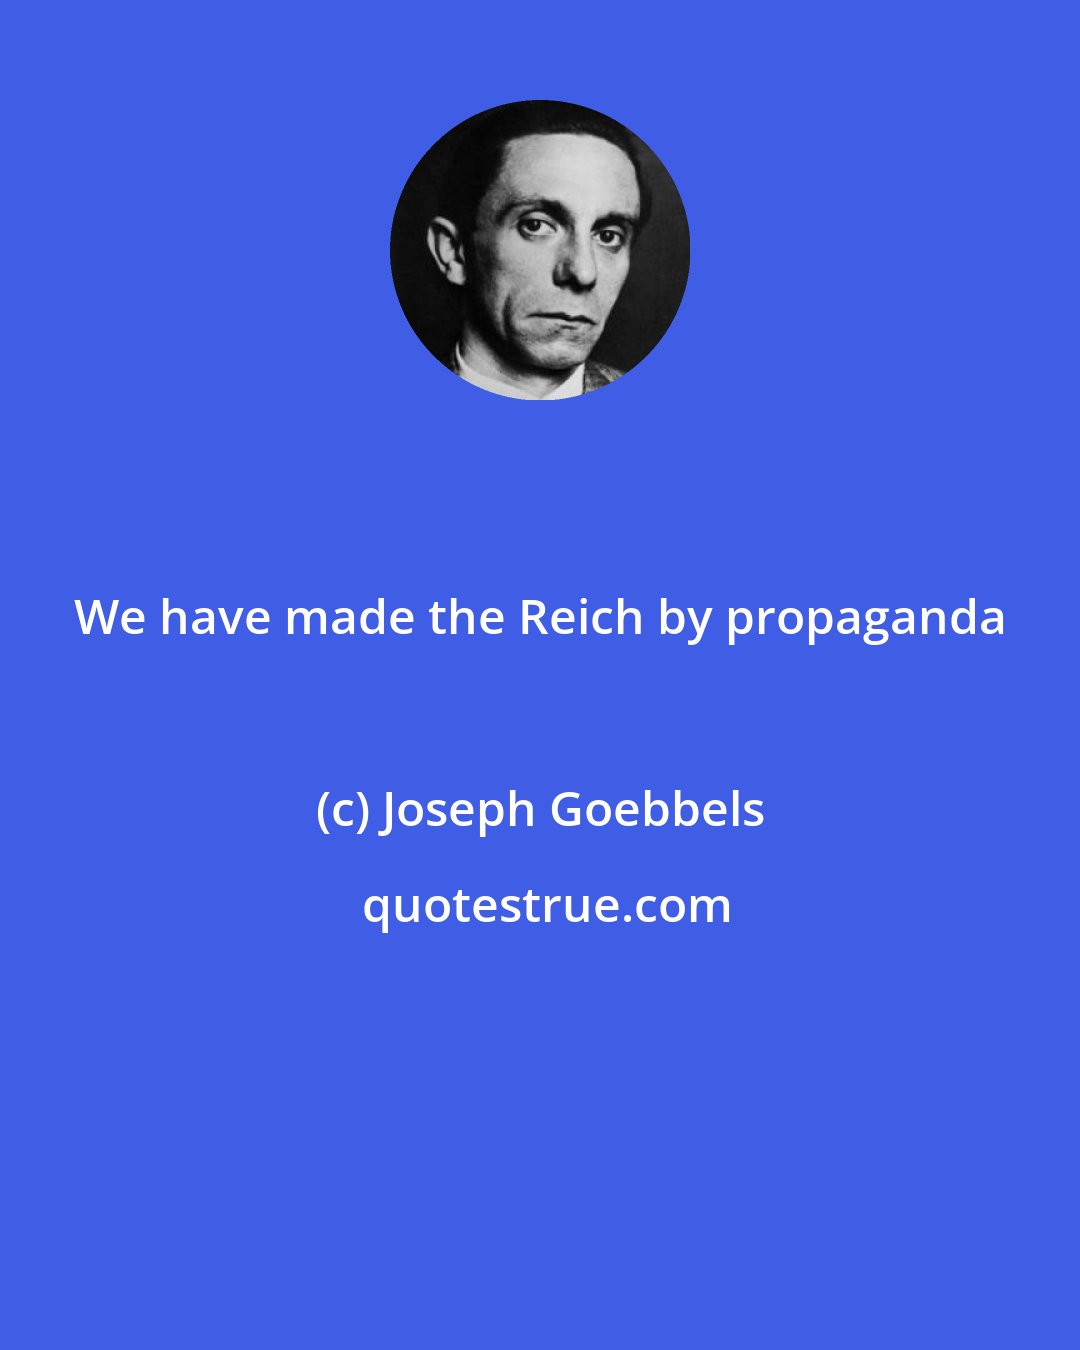 Joseph Goebbels: We have made the Reich by propaganda